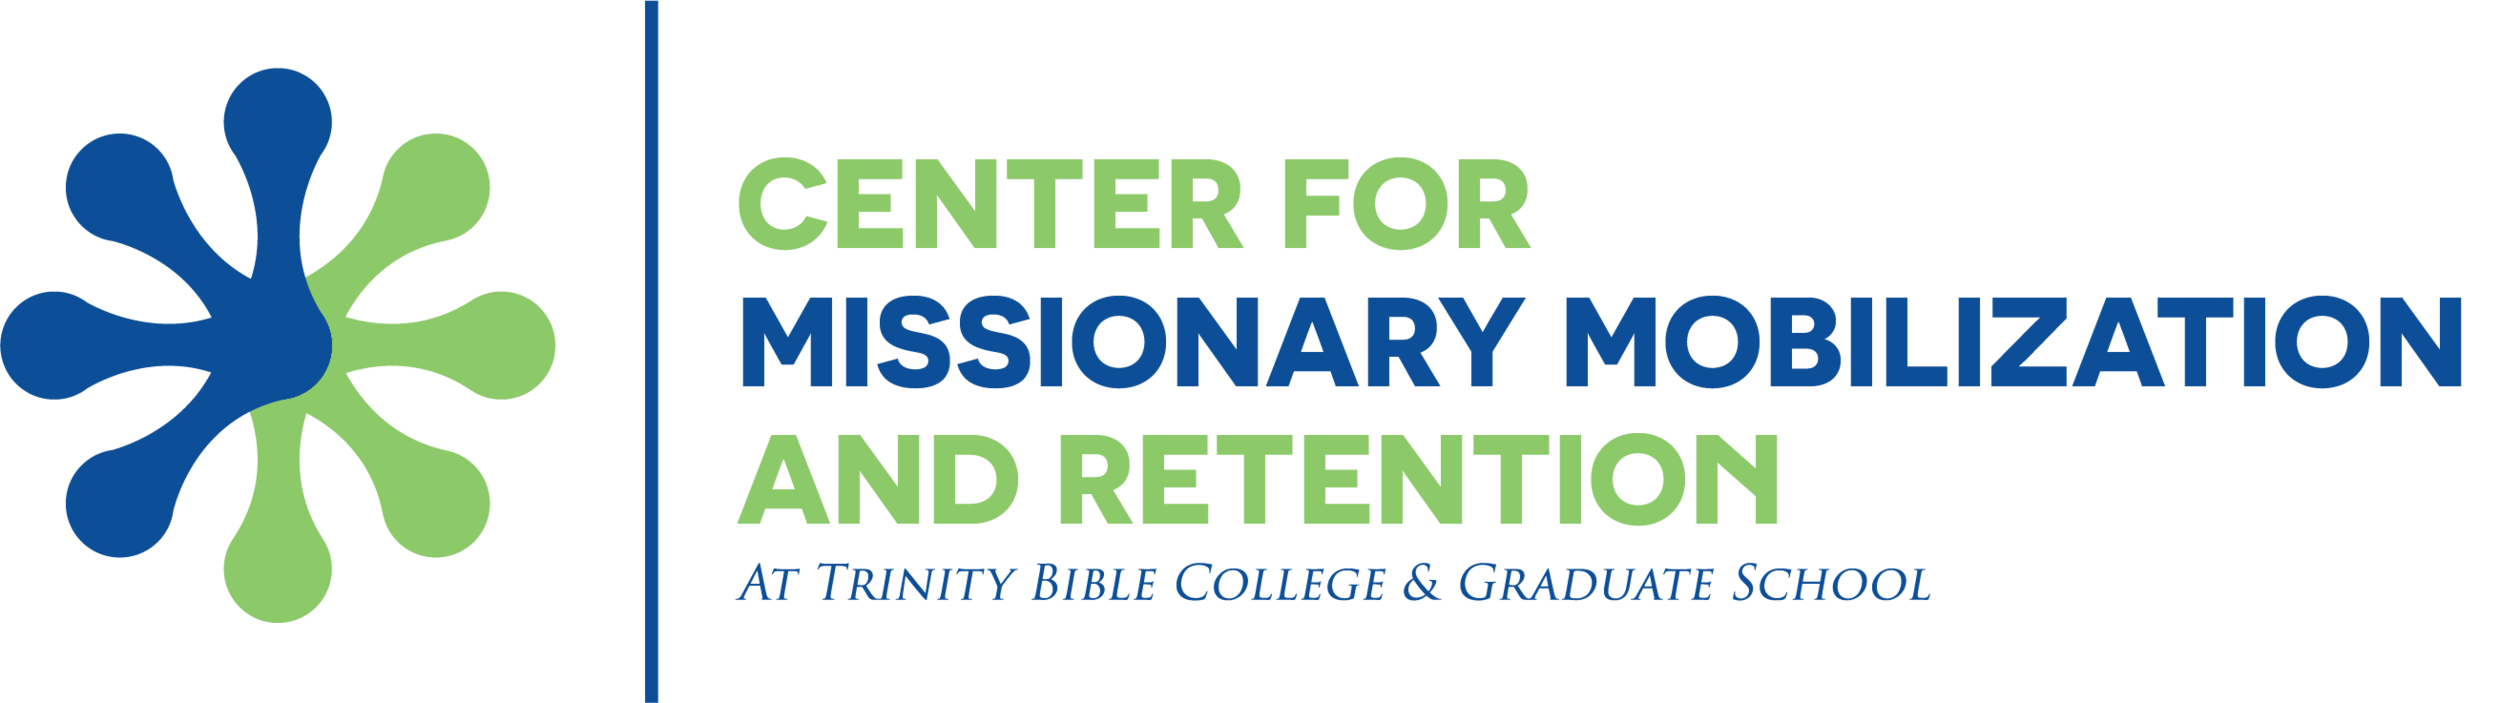 Journal — Center for Missionary Mobilization and Retention